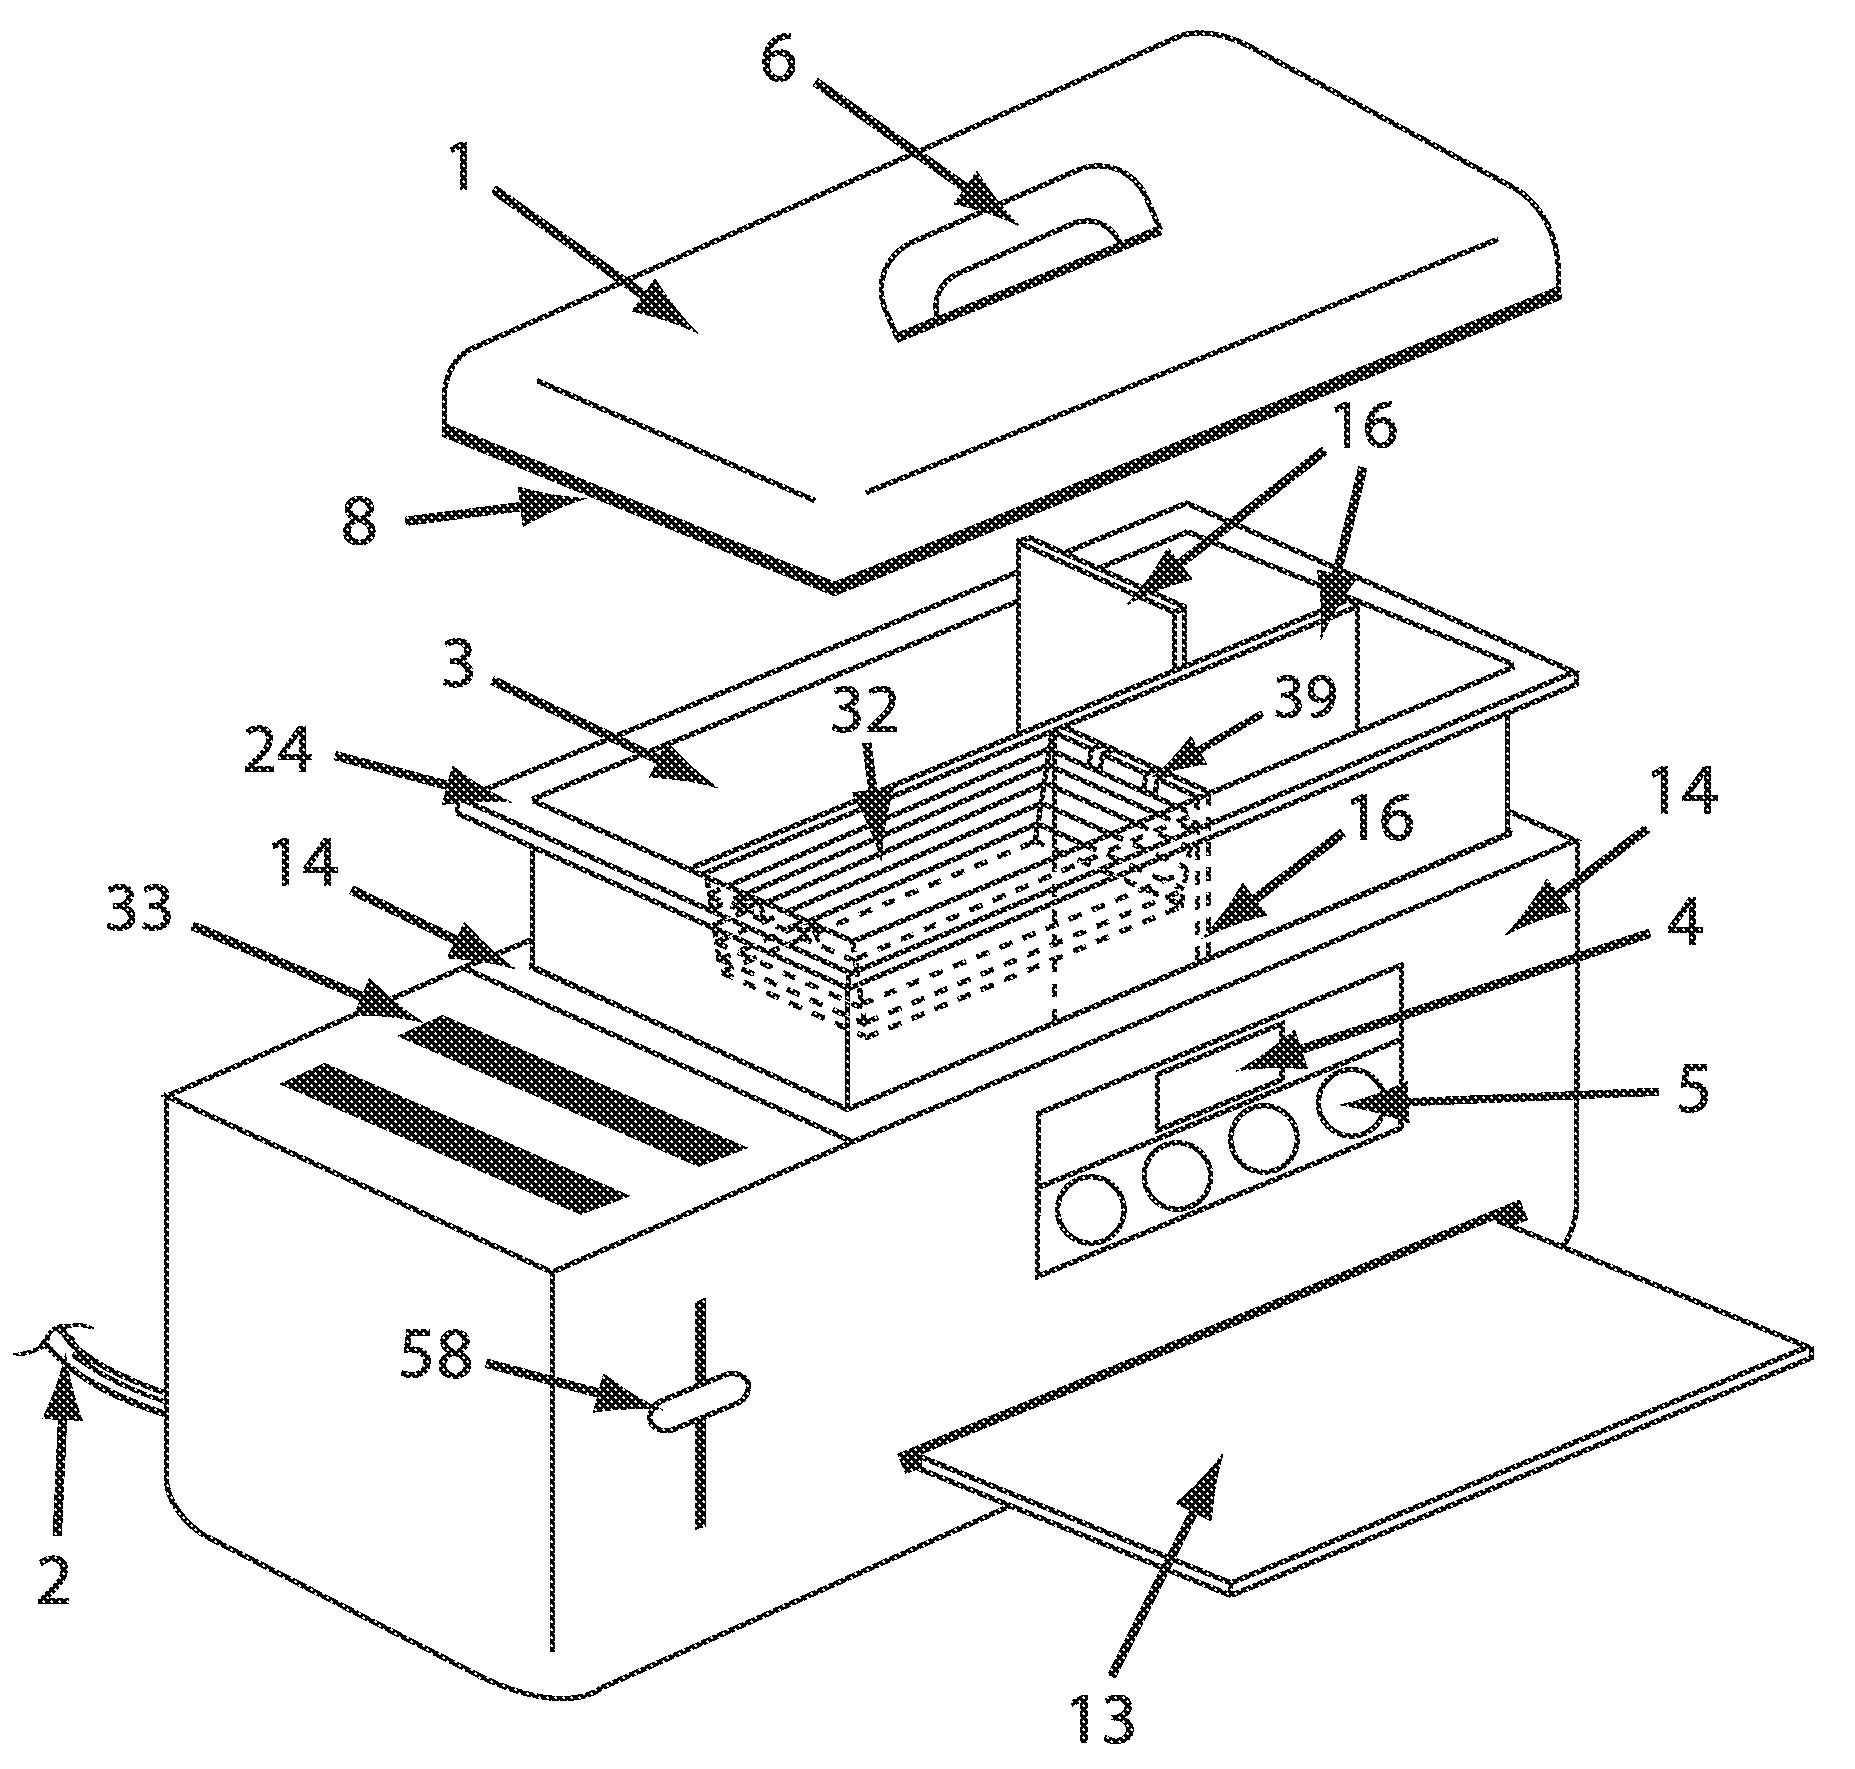 Storage and/or heating system/apparatus for items and food